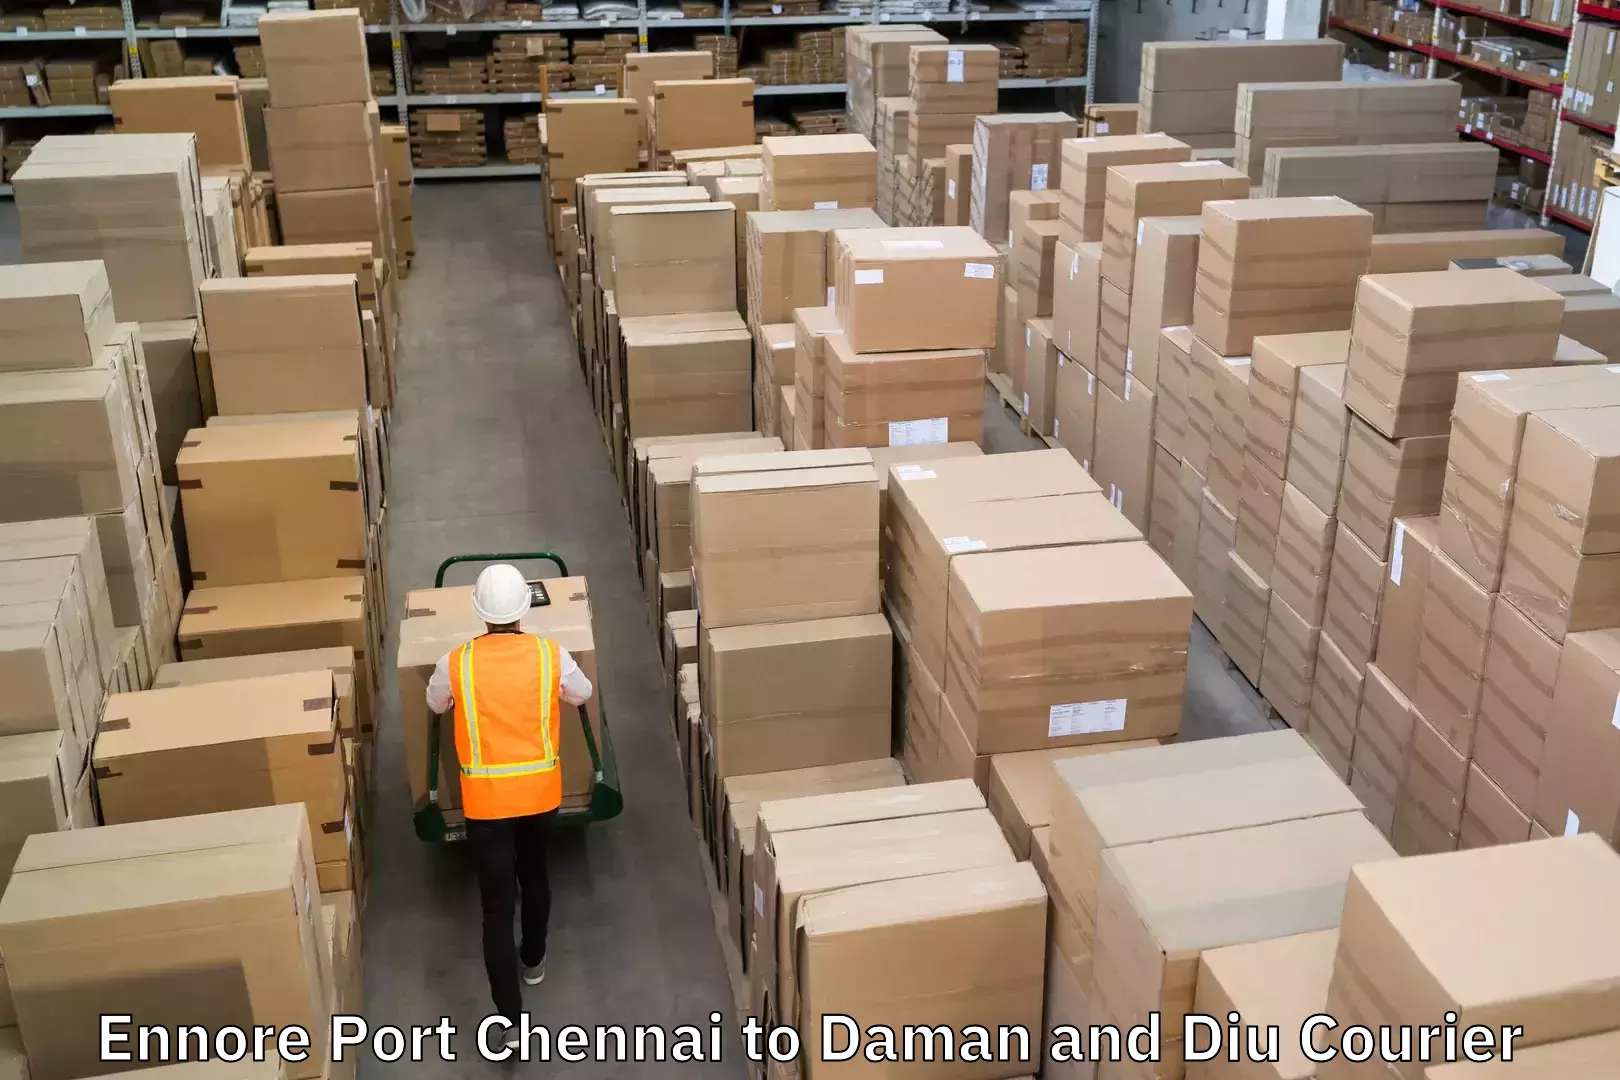 Business logistics support Ennore Port Chennai to Daman and Diu